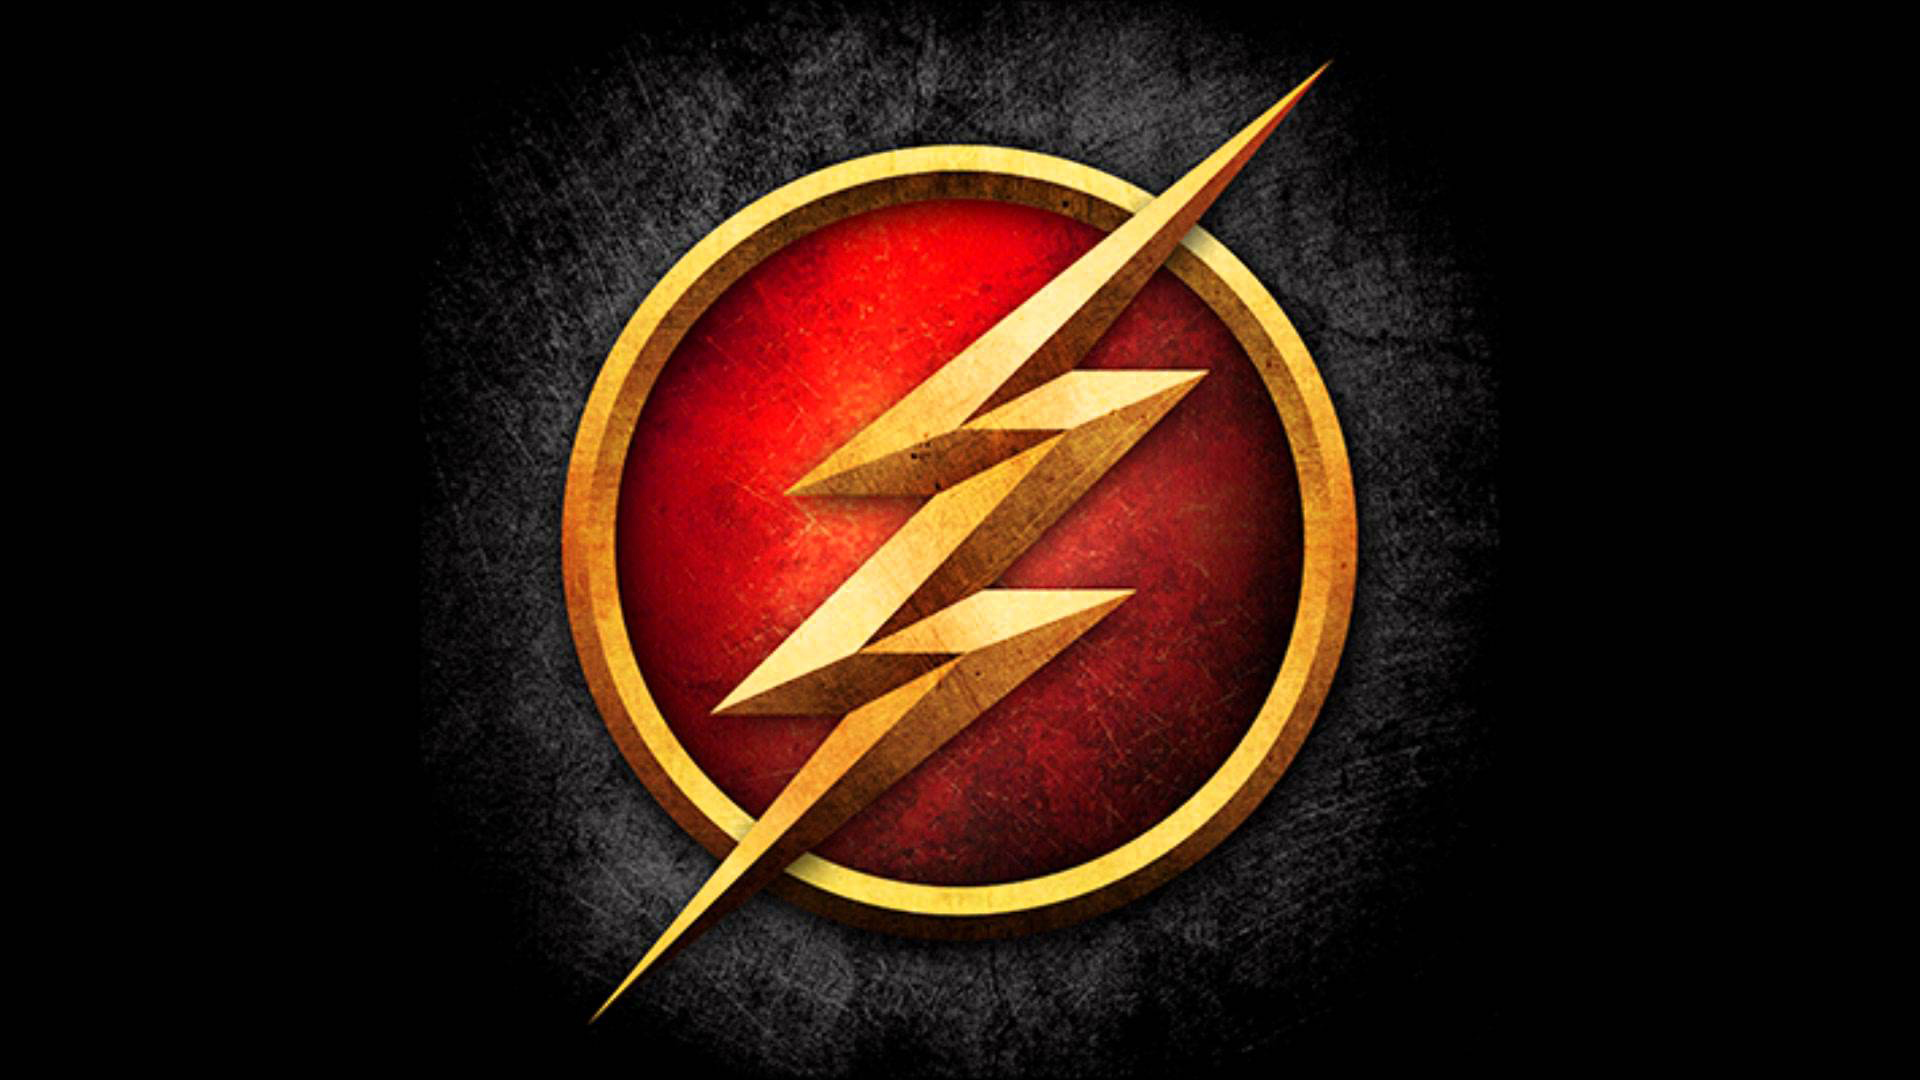 The Flash logo Wallpaper Images HD Movie Backgrounds